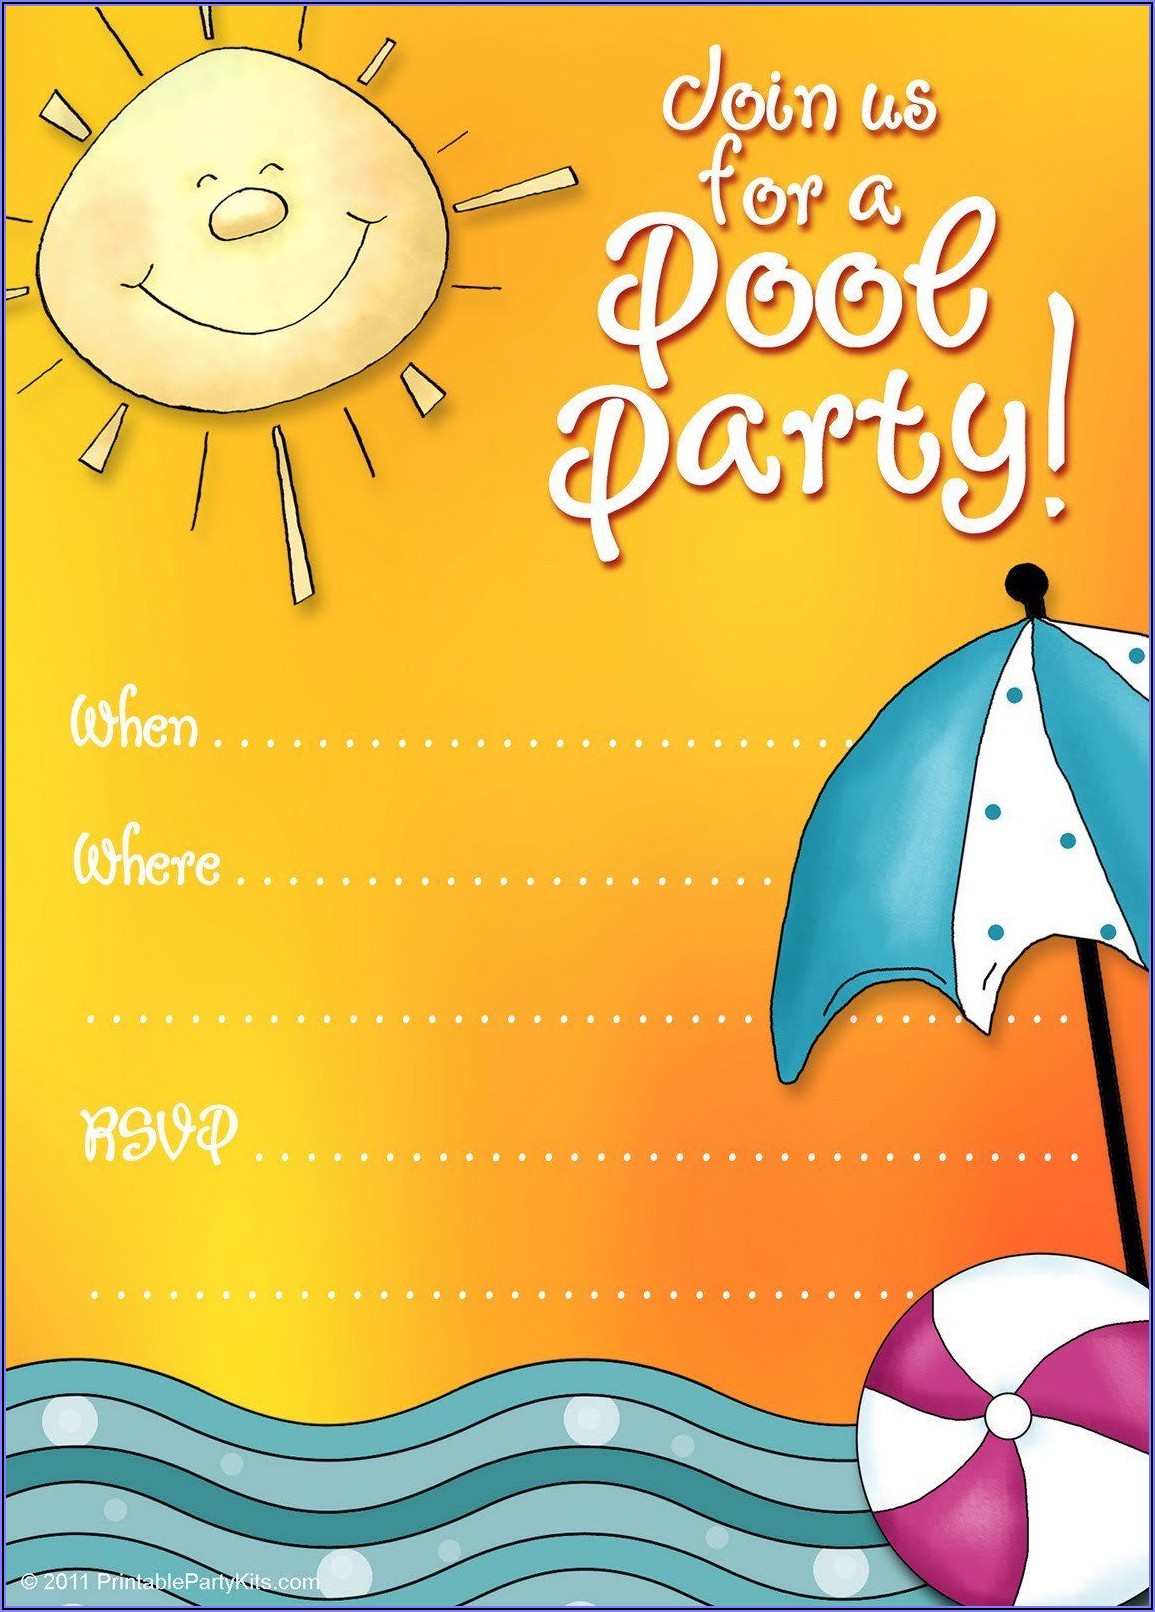 Pool Party Invitations Templates Free